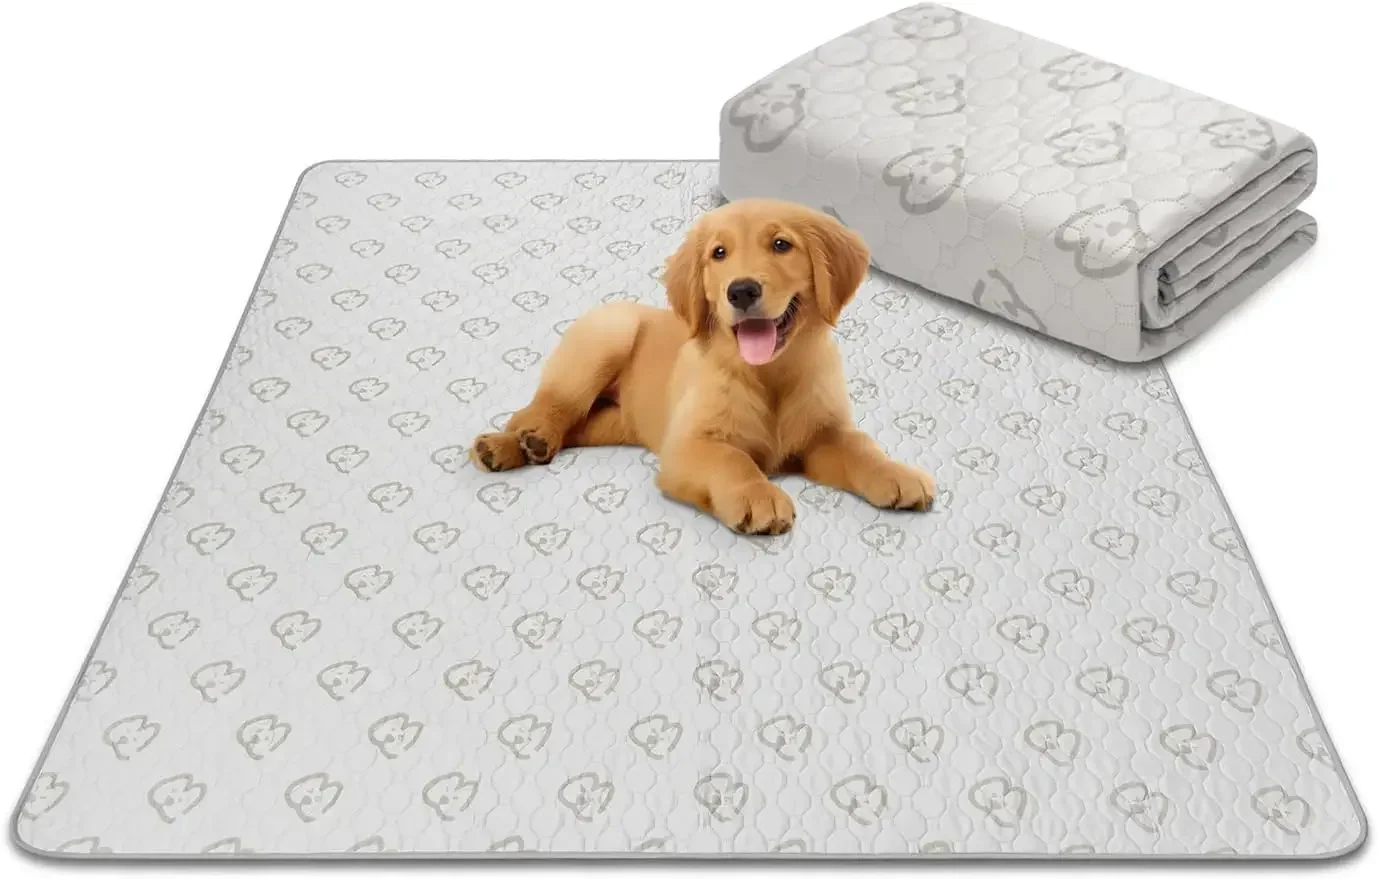 

FXW Washable Pee Pads for Dogs(Playpen not Included), 71" x 71" Puppy Pads with Super Absorbent